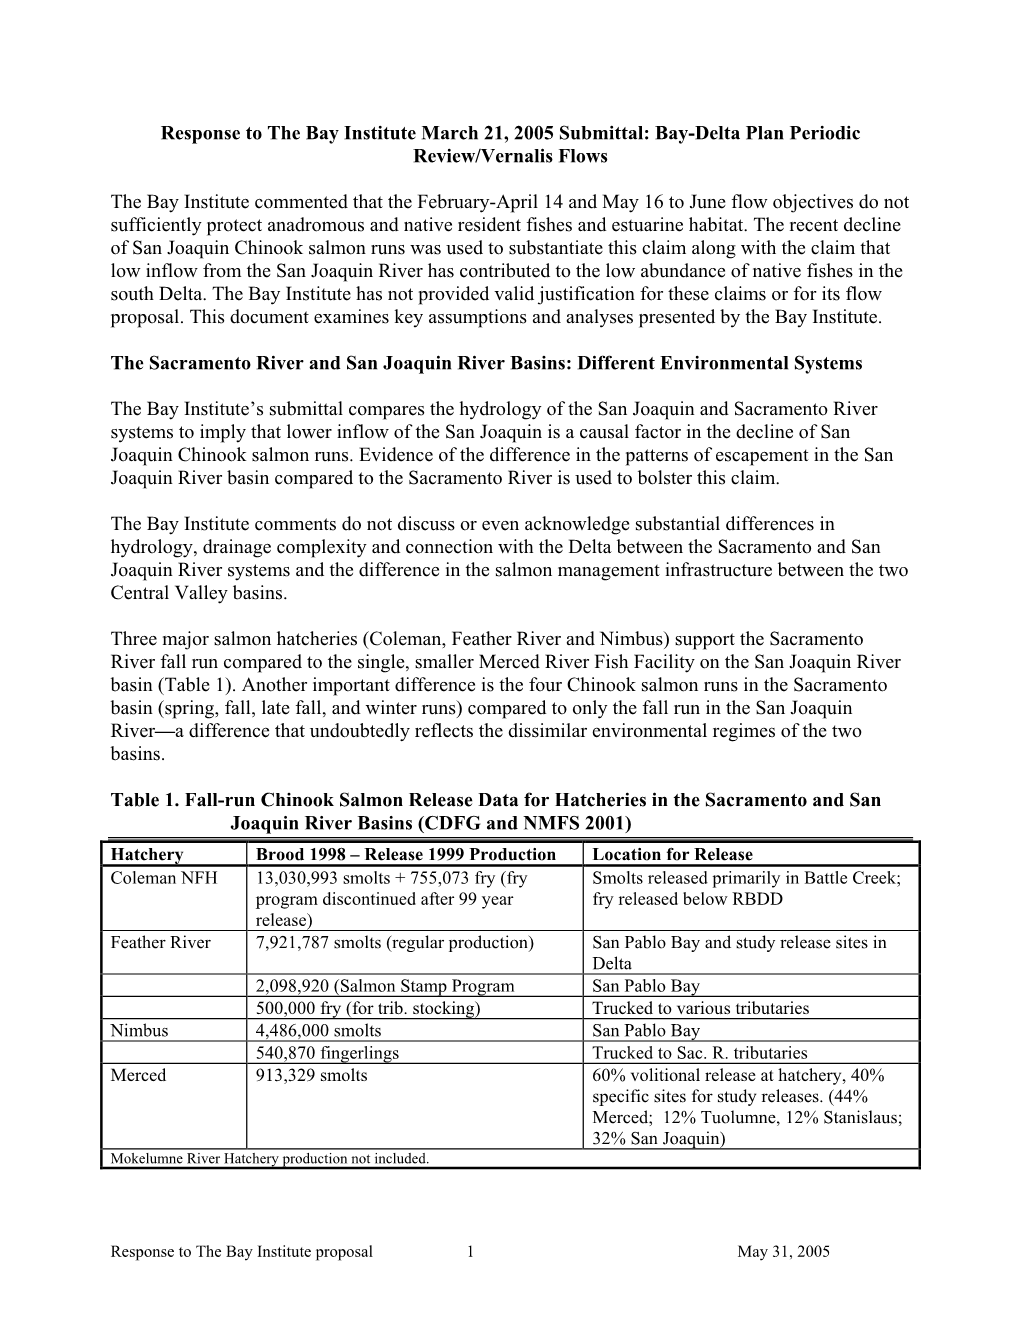 Response to the Bay Institute March 21, 2005 Submittal: Bay-Delta Plan Periodic Review/Vernalis Flows